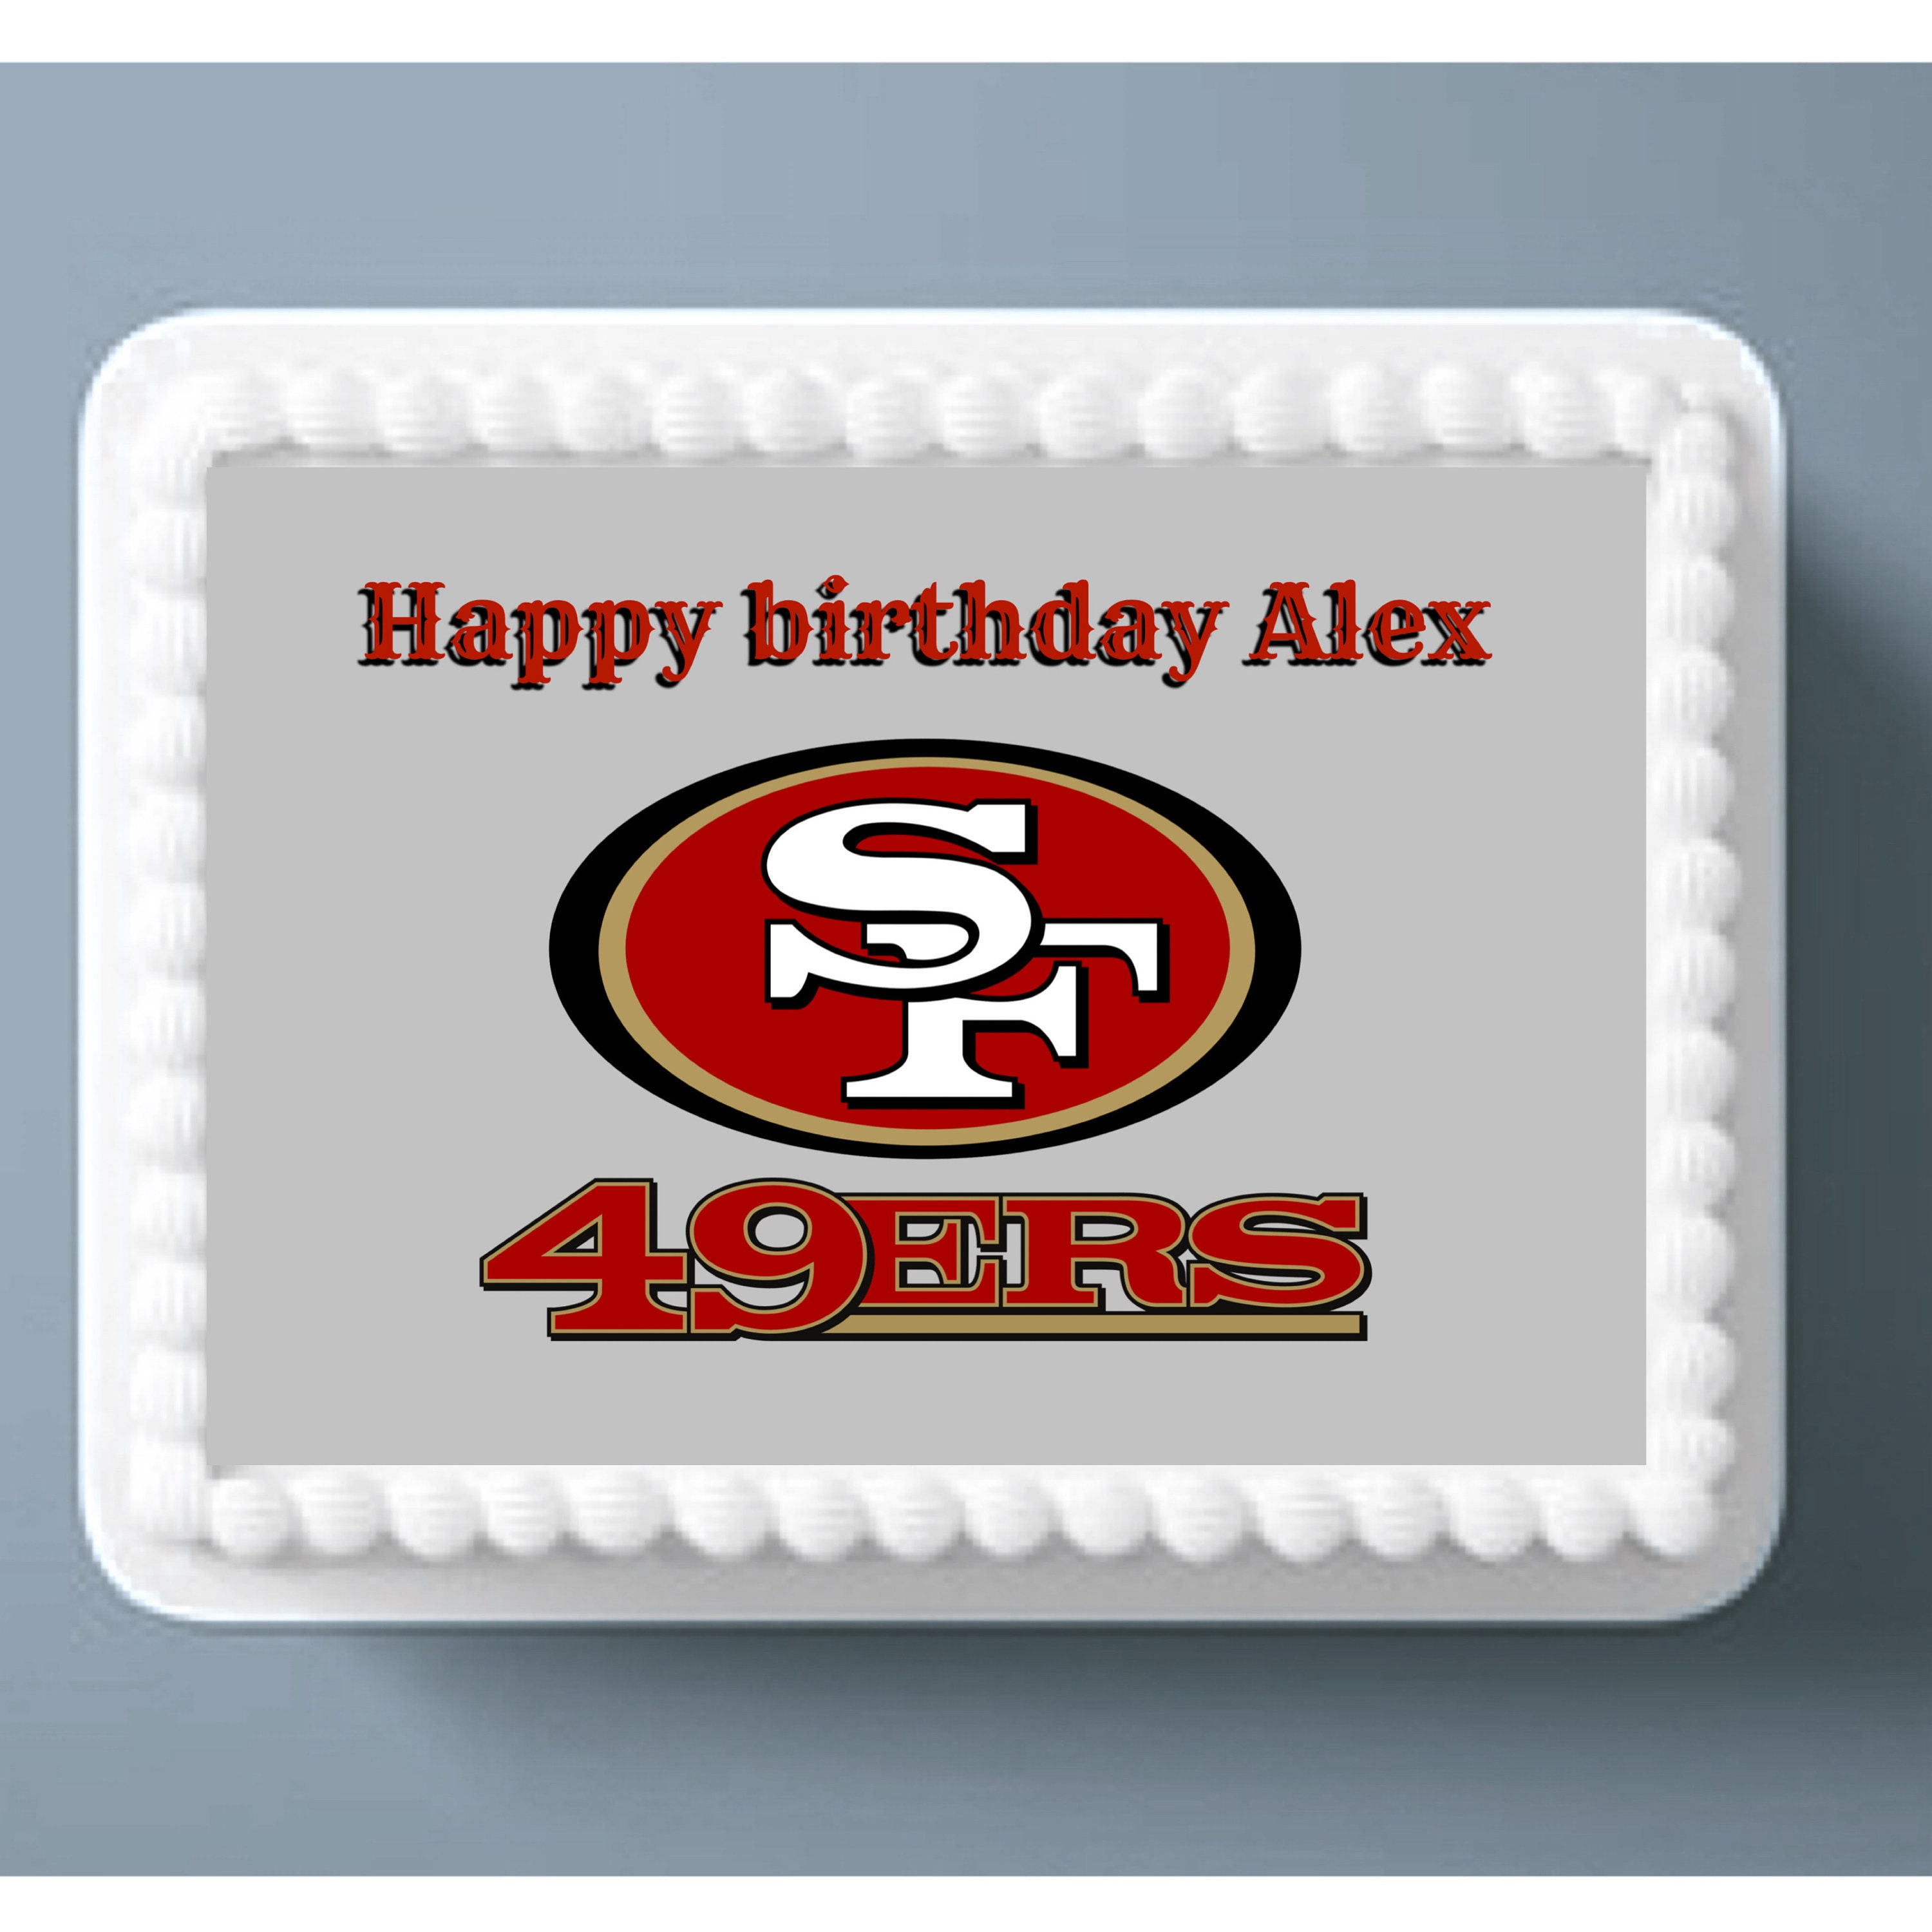  49ers Personalized Cake Topper 1/2 11.7 x 17.5 Inches